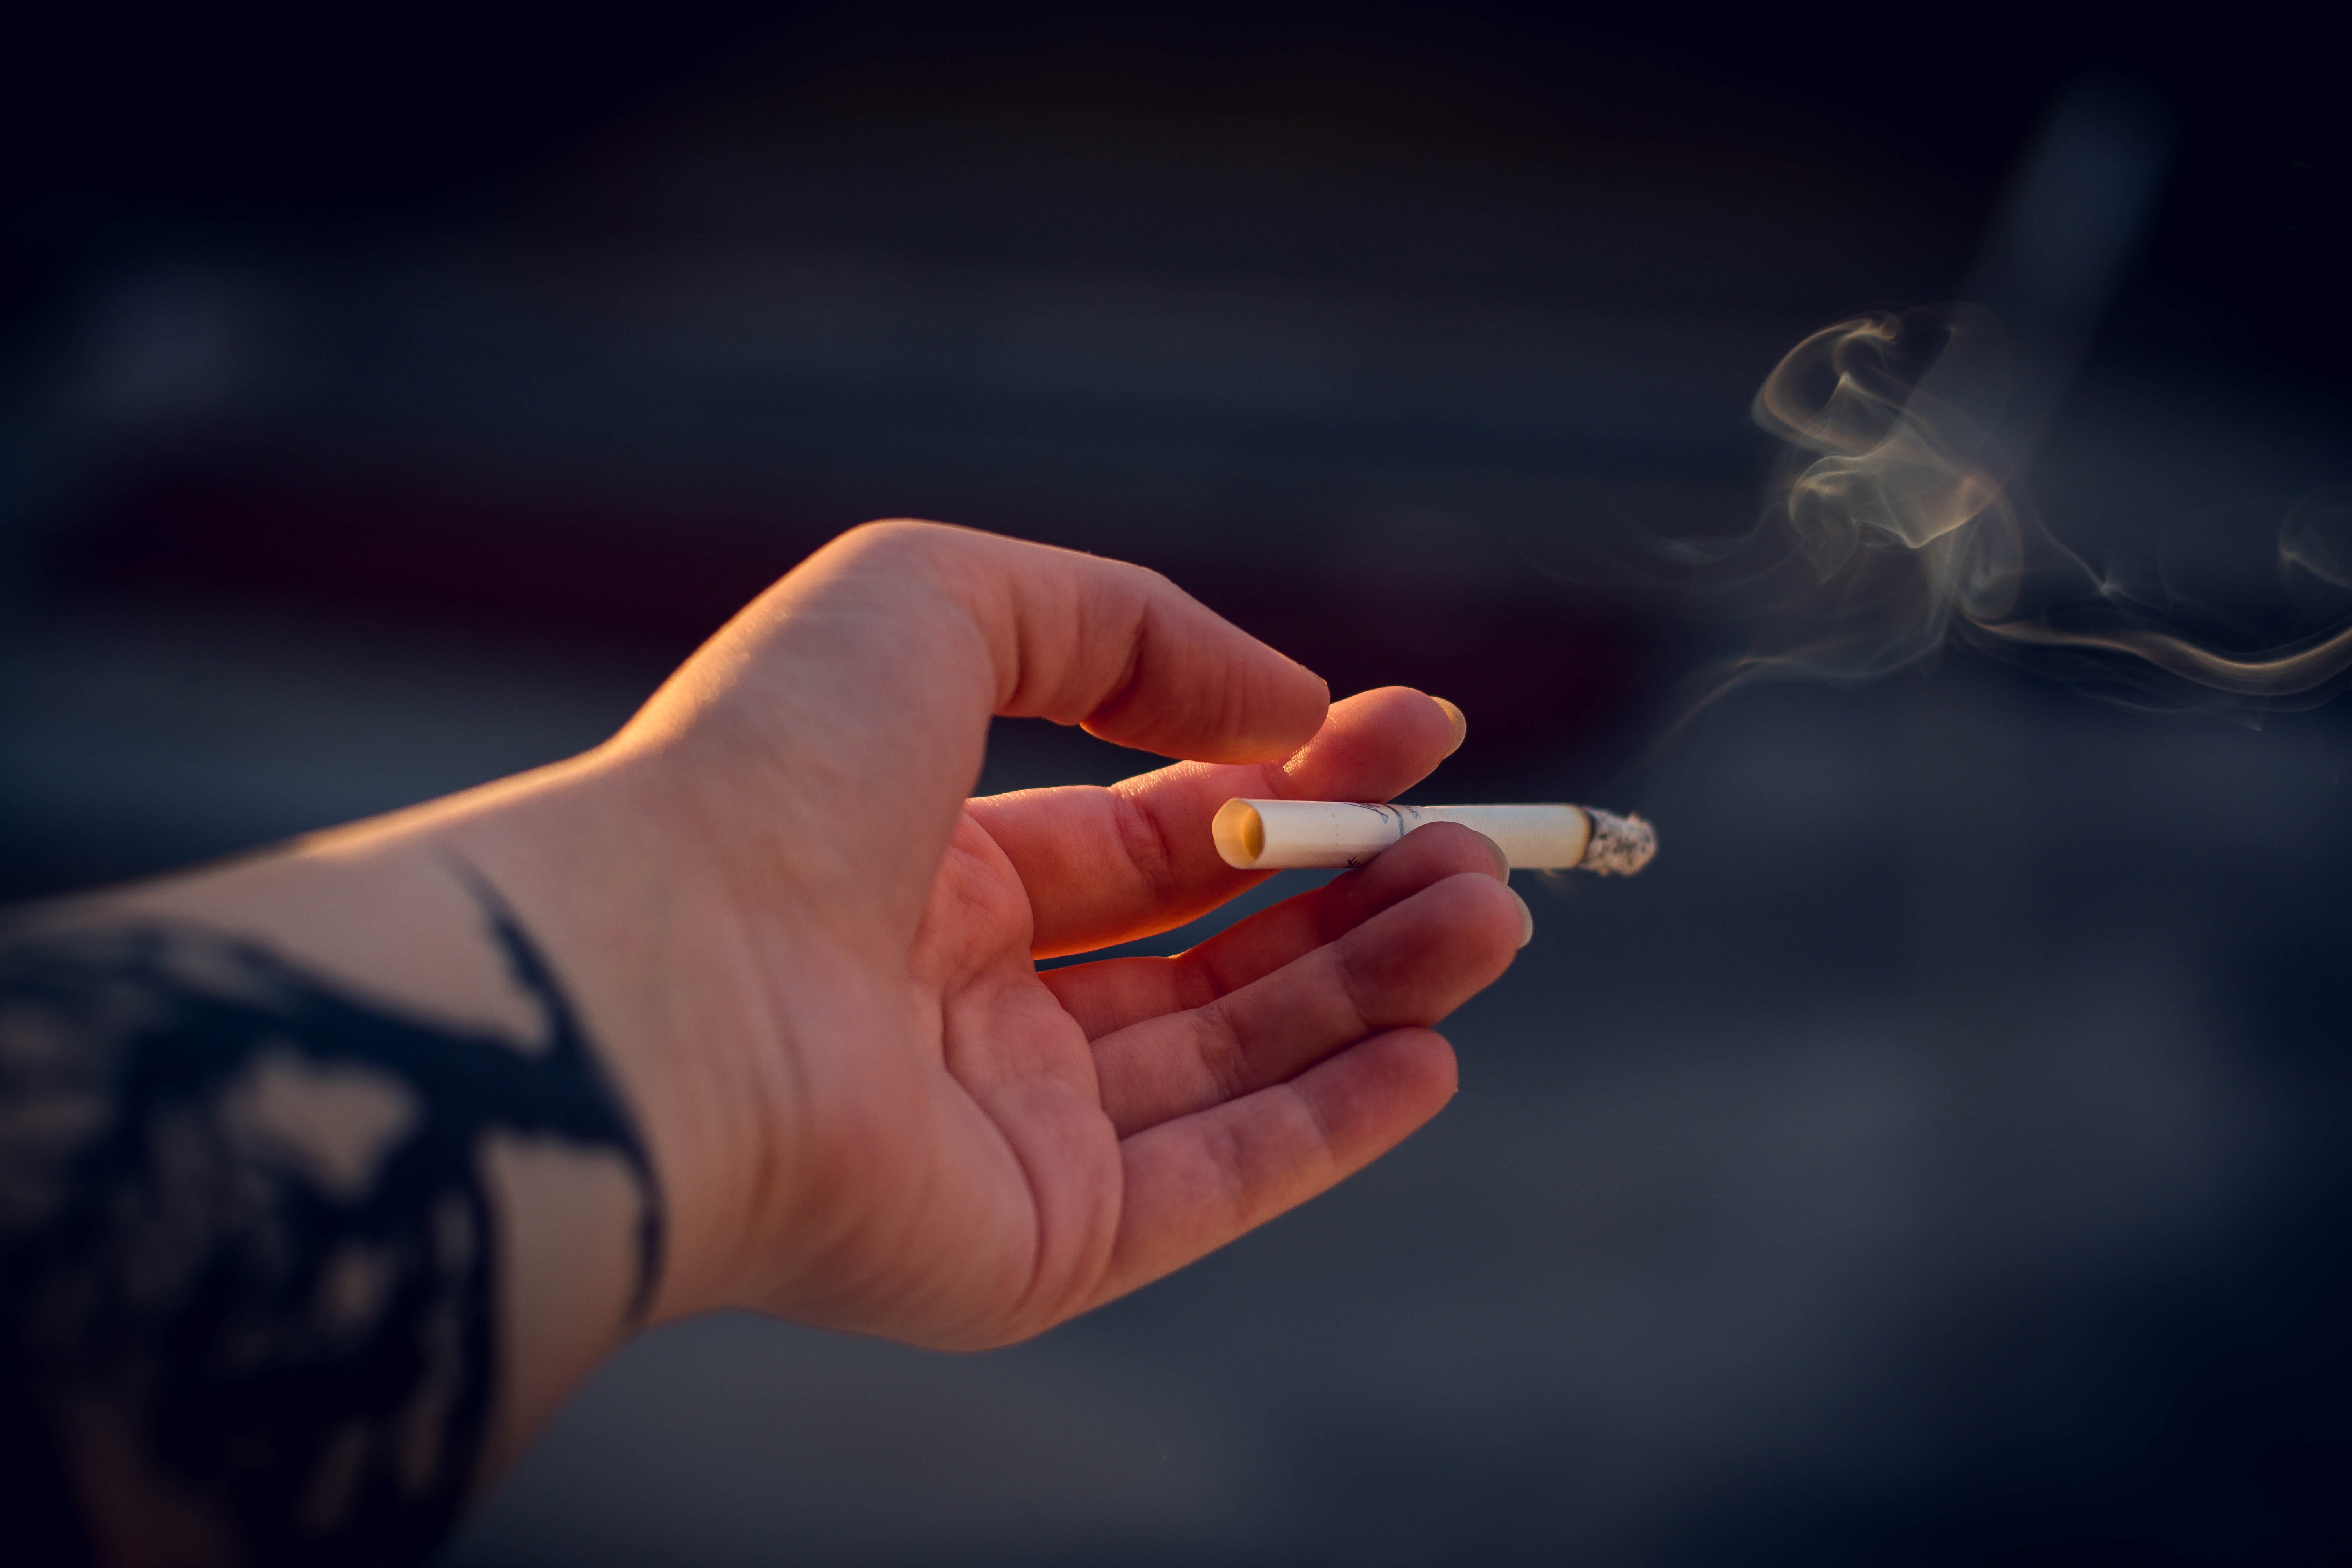 Dr Koh Poh Koon, Senior Minister of State for Health, said various studies have shown that every 10 per cent increase in cigarette prices will result in a 3 to 5 per cent dip in overall tobacco consumption.